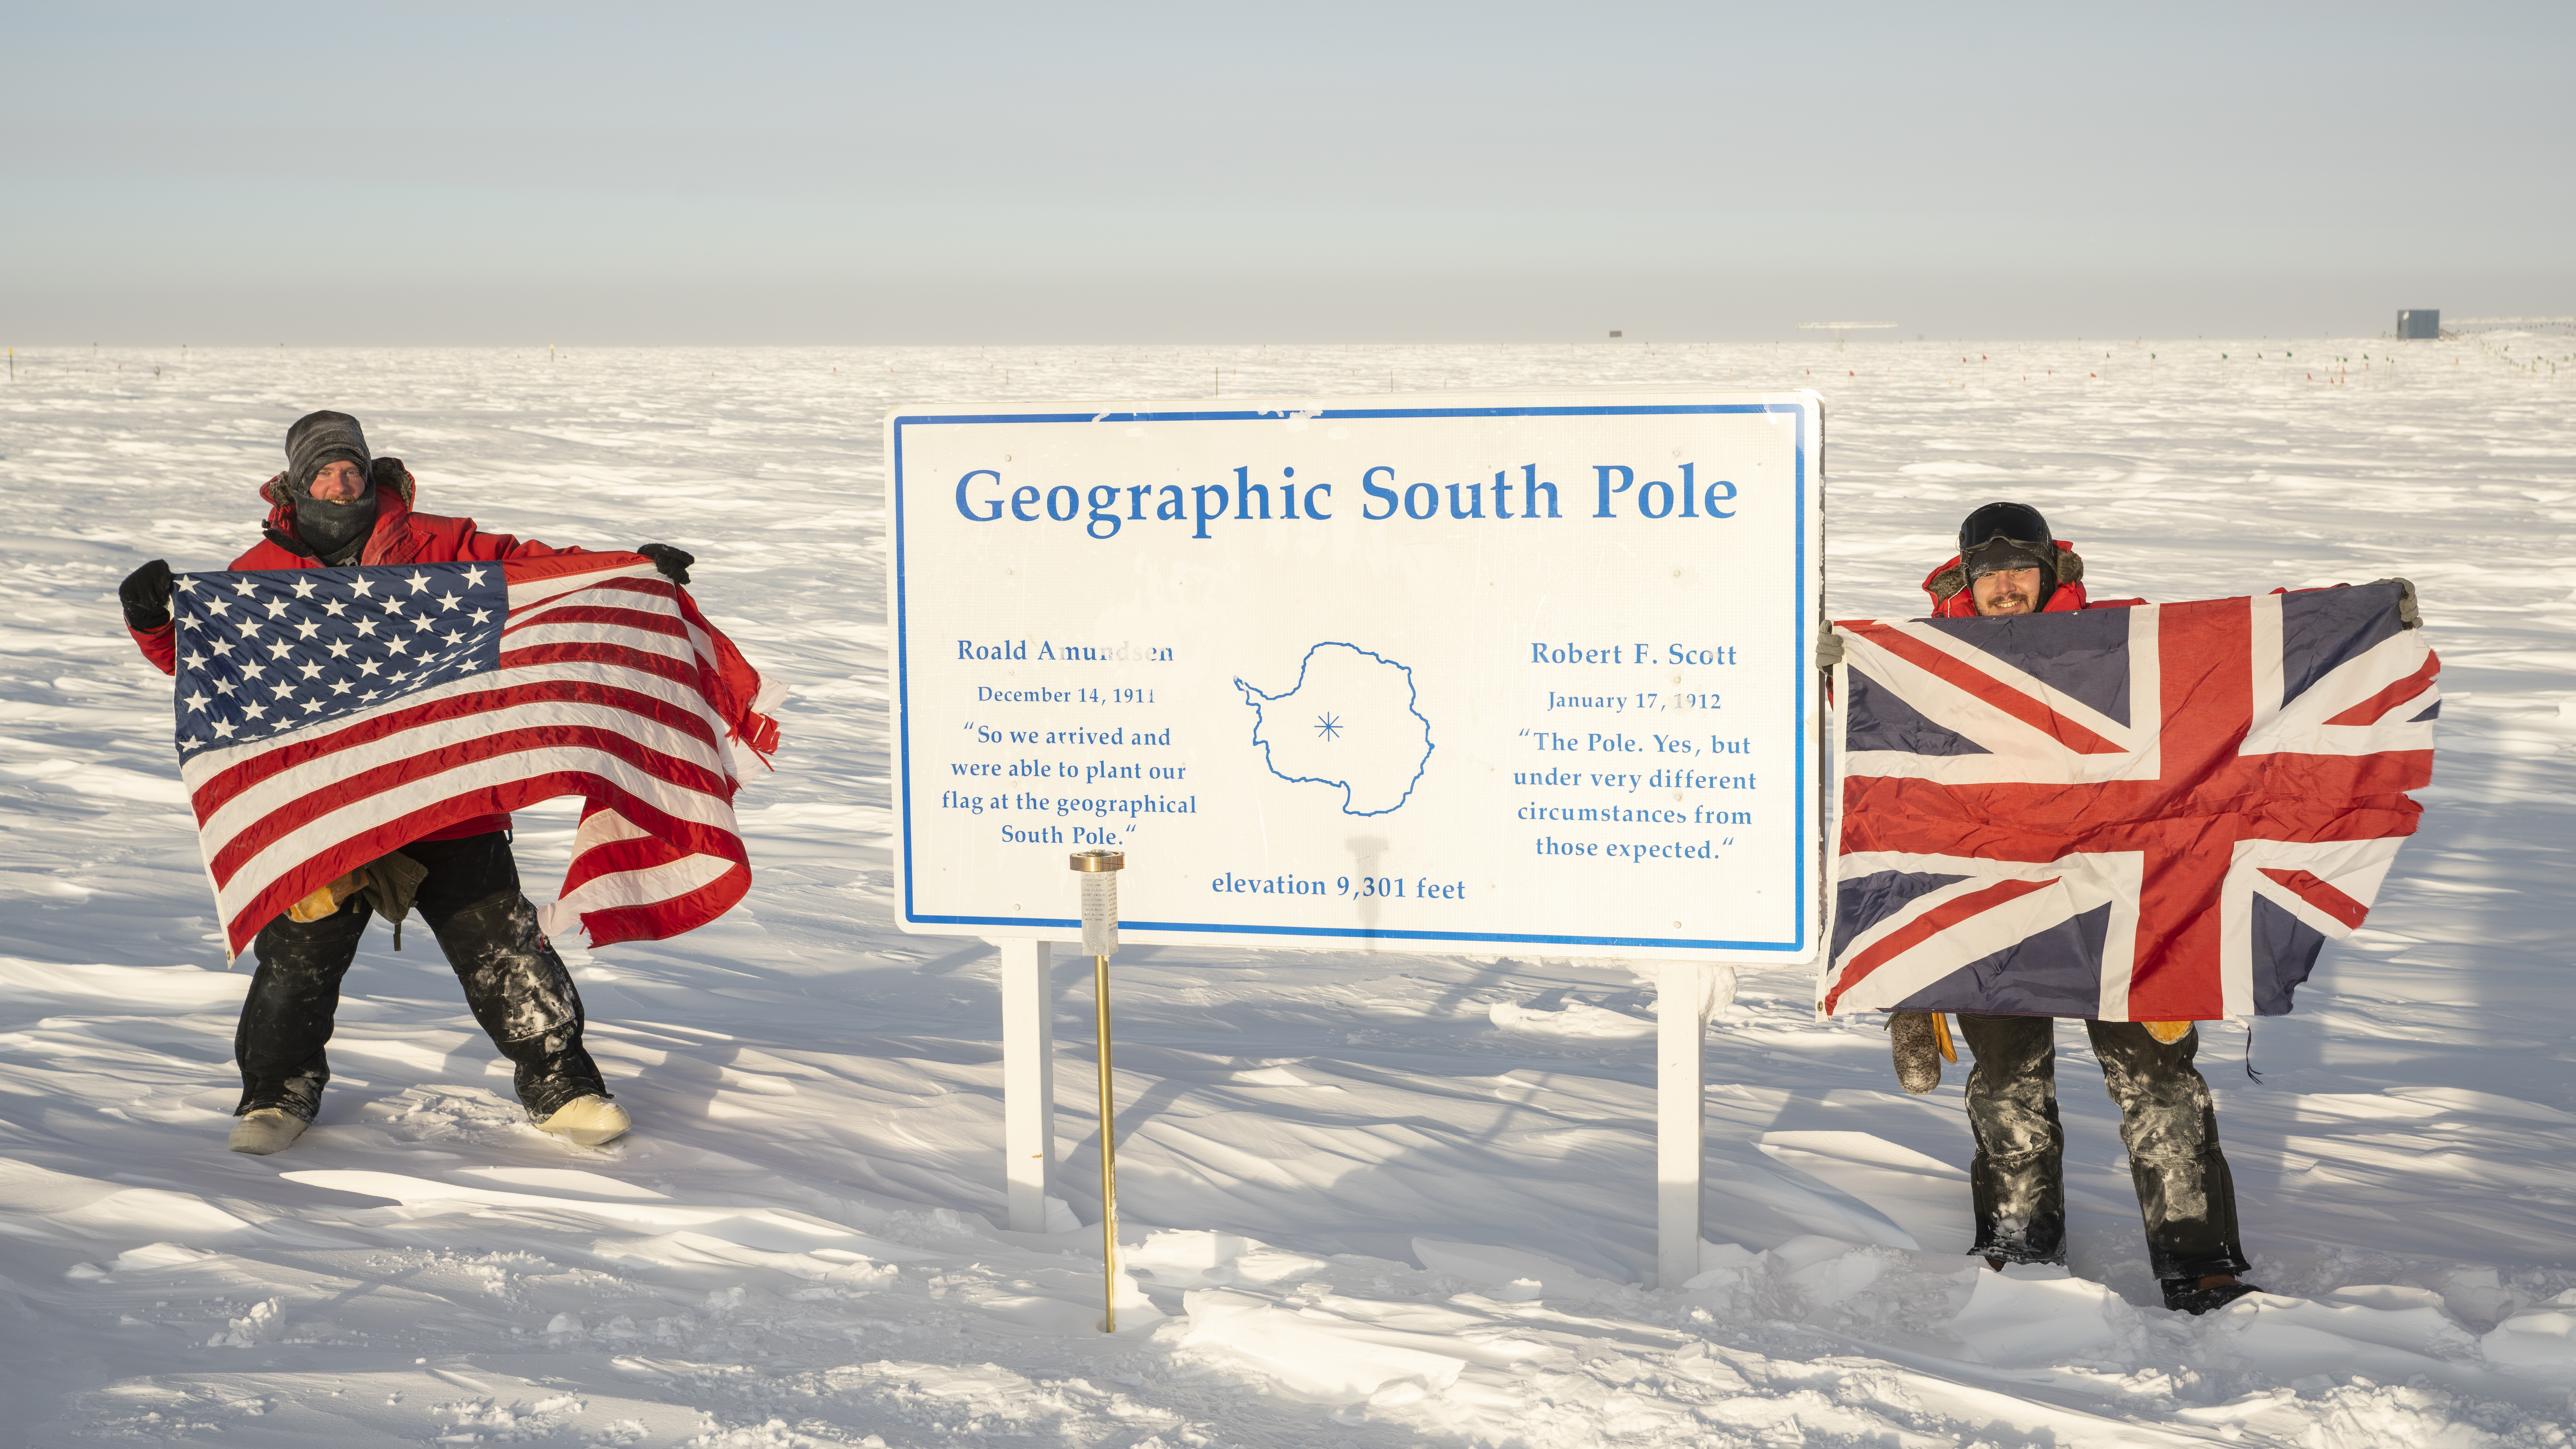 IceCube winterovers holding US and British flags next to geographic South Pole sign.